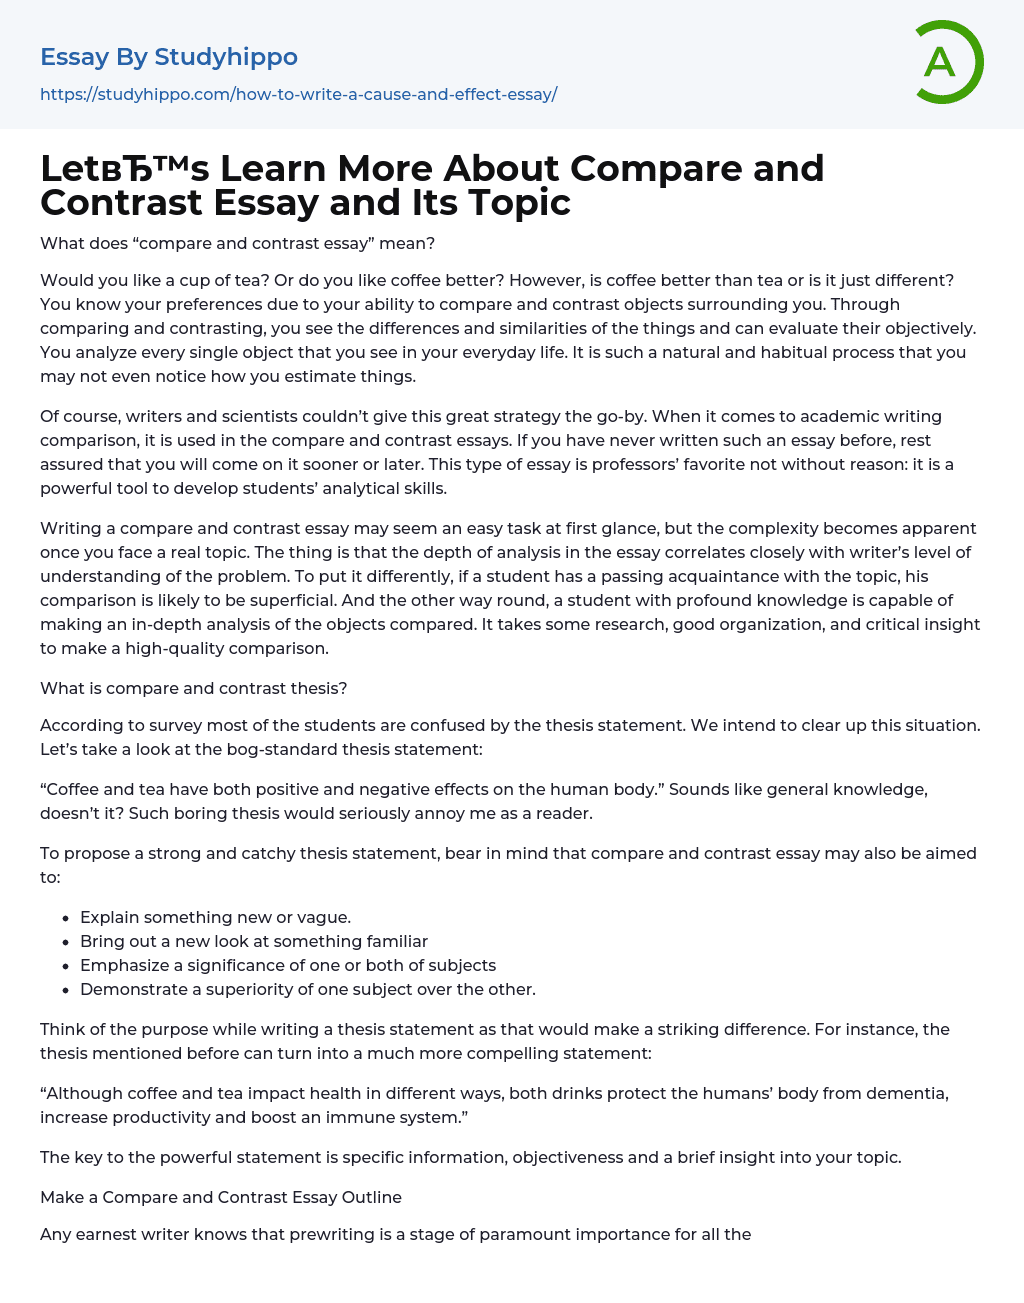 Let’s Learn More About Compare and Contrast Essay and Its Topic